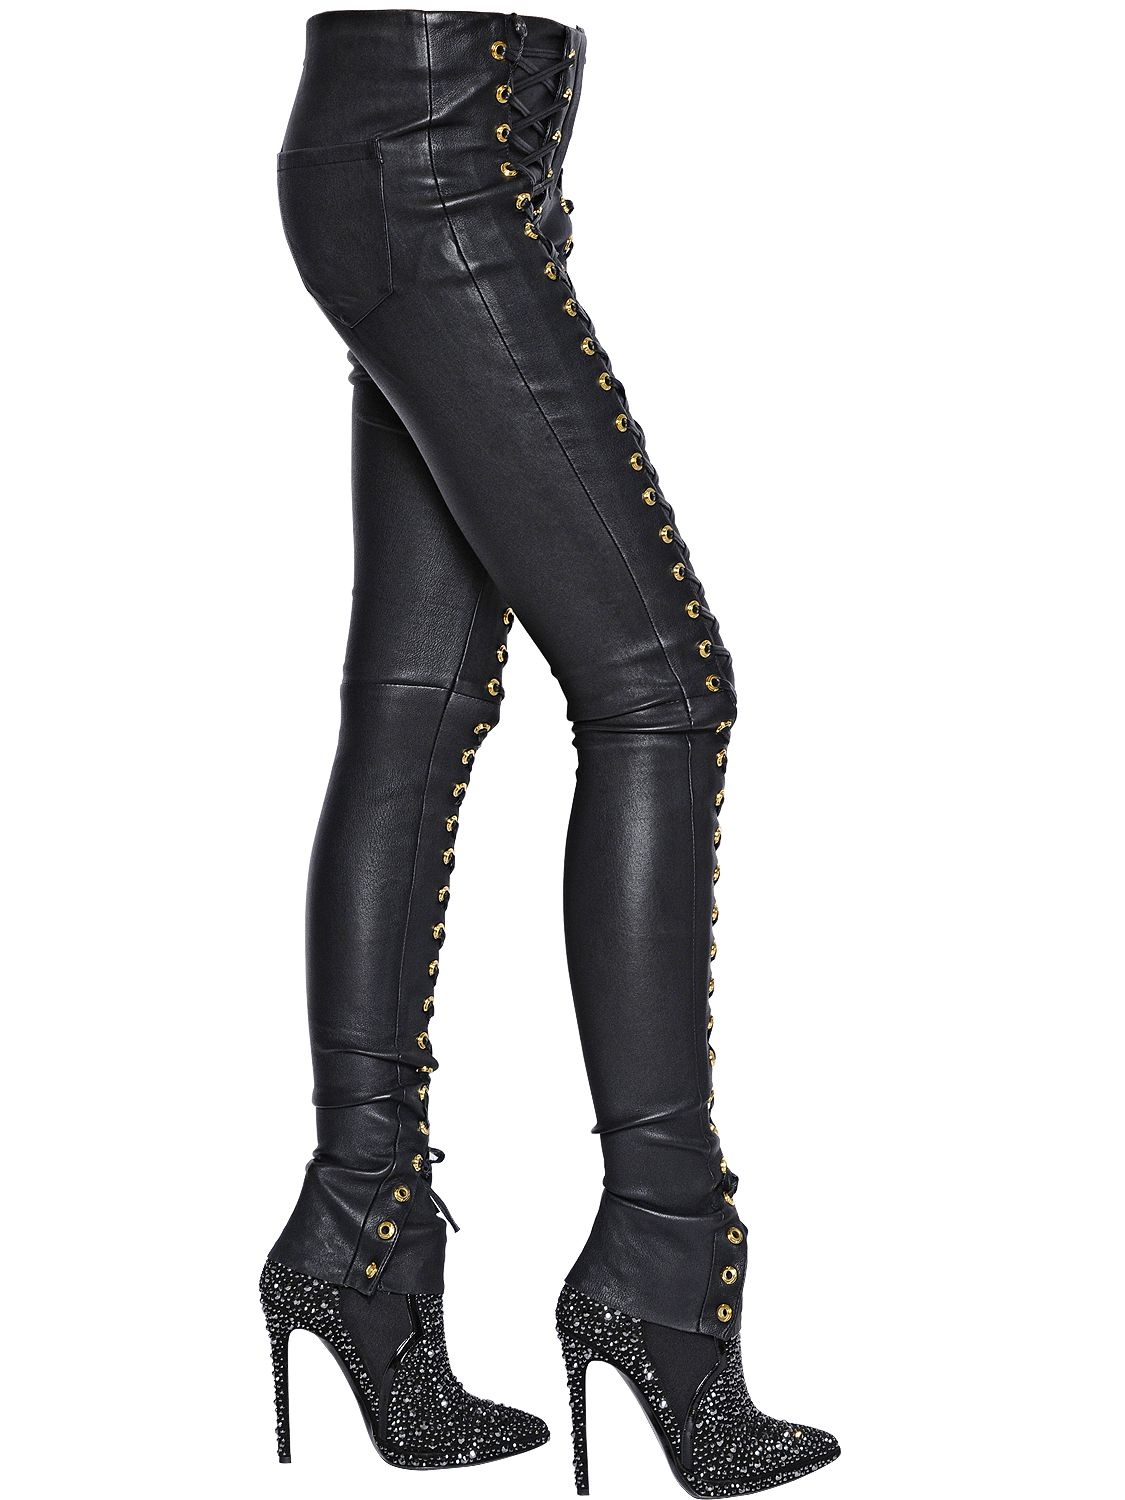 Lyst - Philipp Plein Lace-Up Nappa Leather Pants in Black